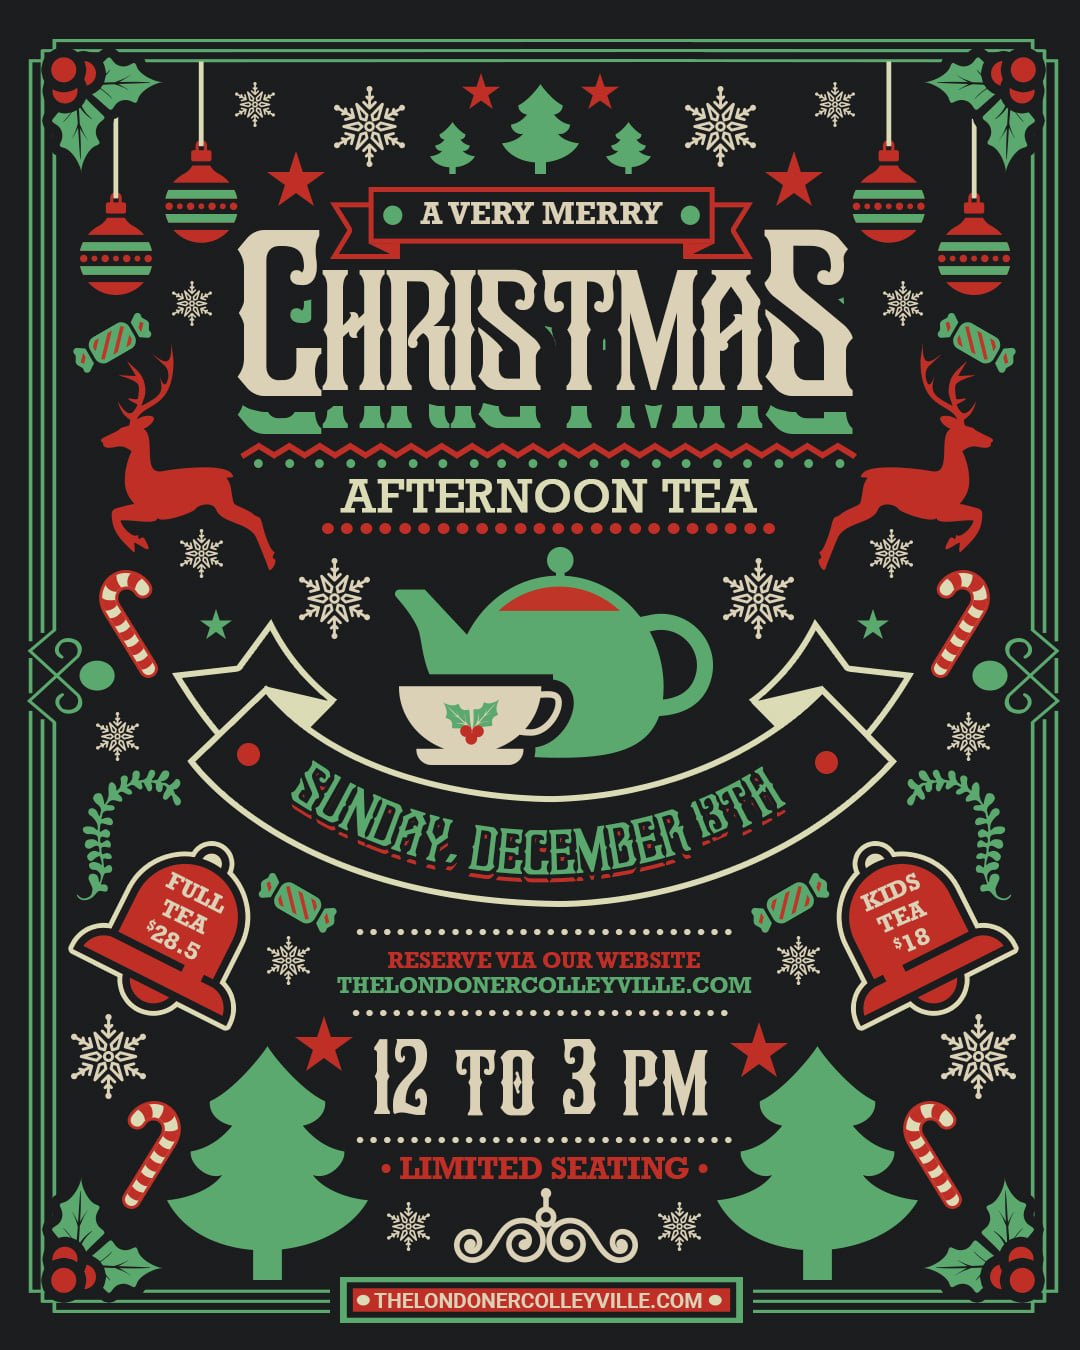 The Londoner Colleyville 2020 Holiday Tea promotion